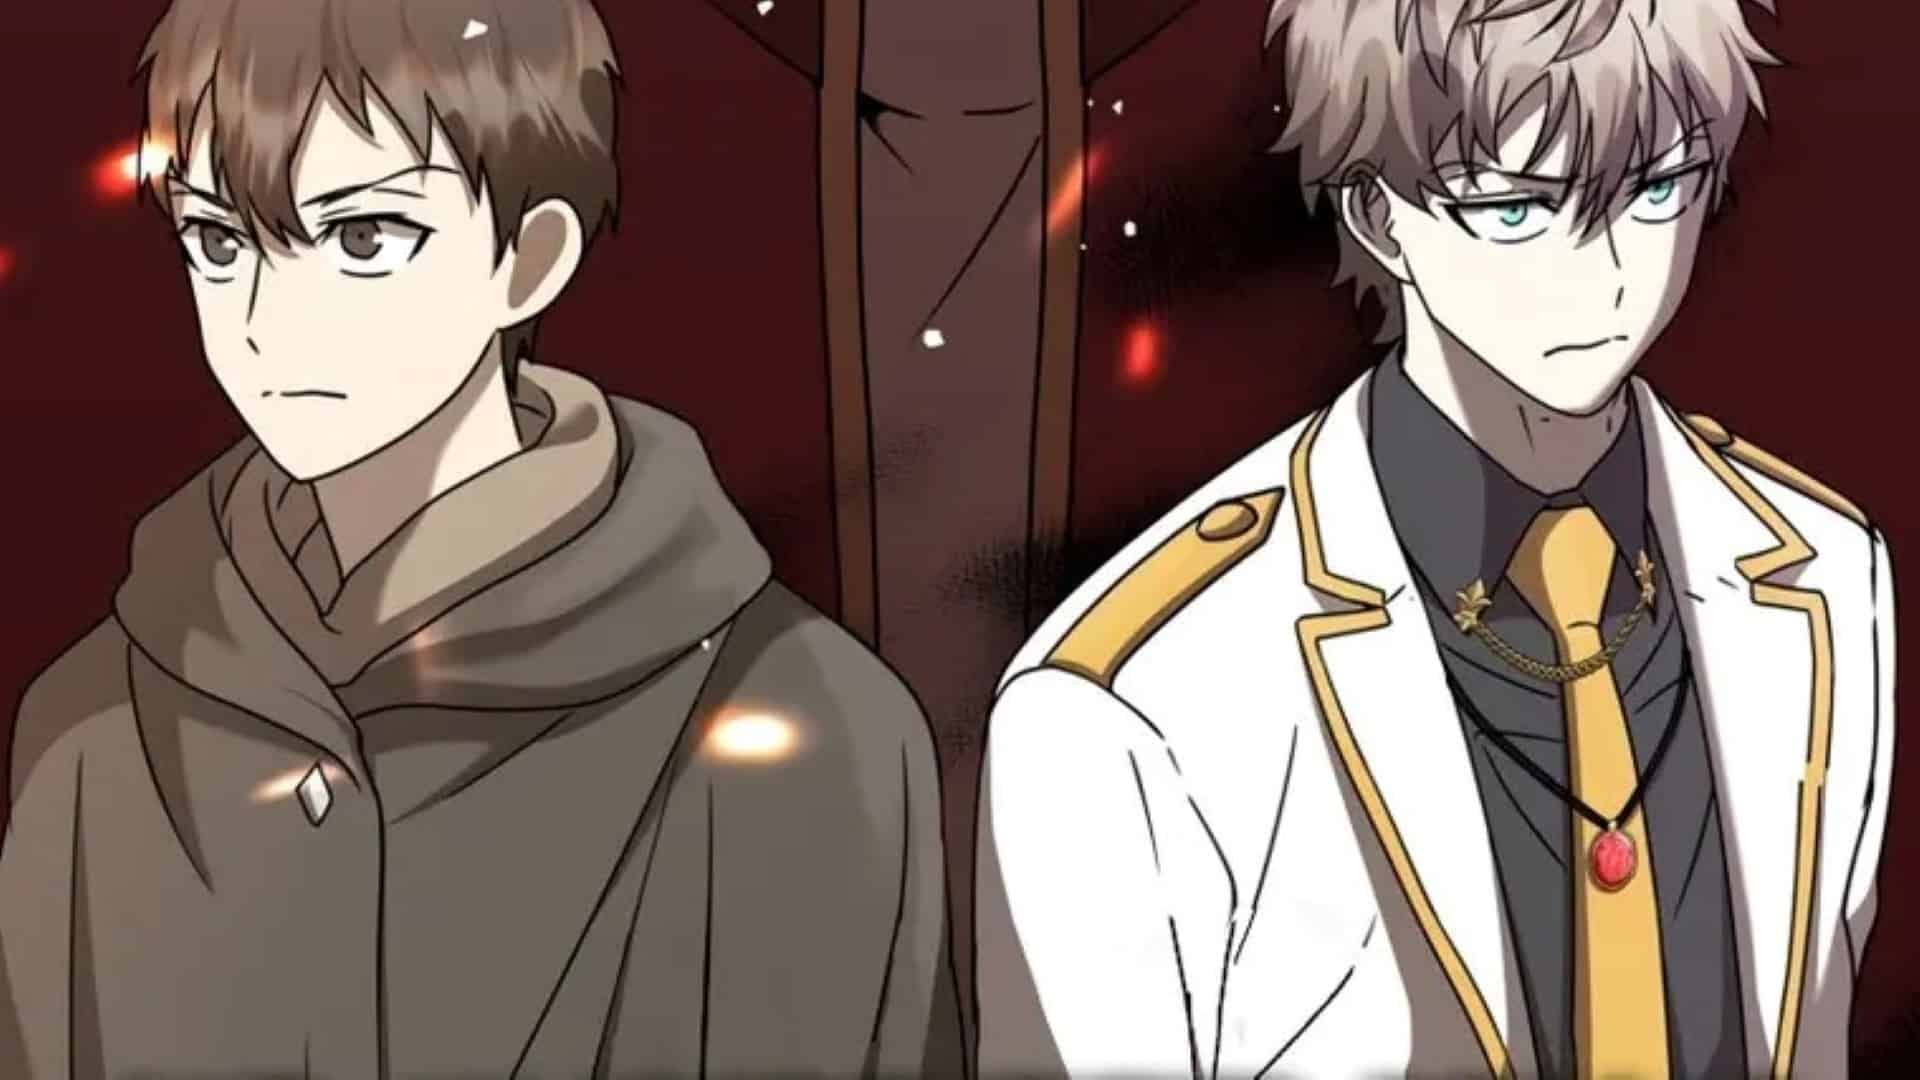 Valier Junior's Human Prisoner Appearance (Left) Vs Student of Temple Class A Appearance (Right) - The Demon Prince Goes To The Academy Chapter 24